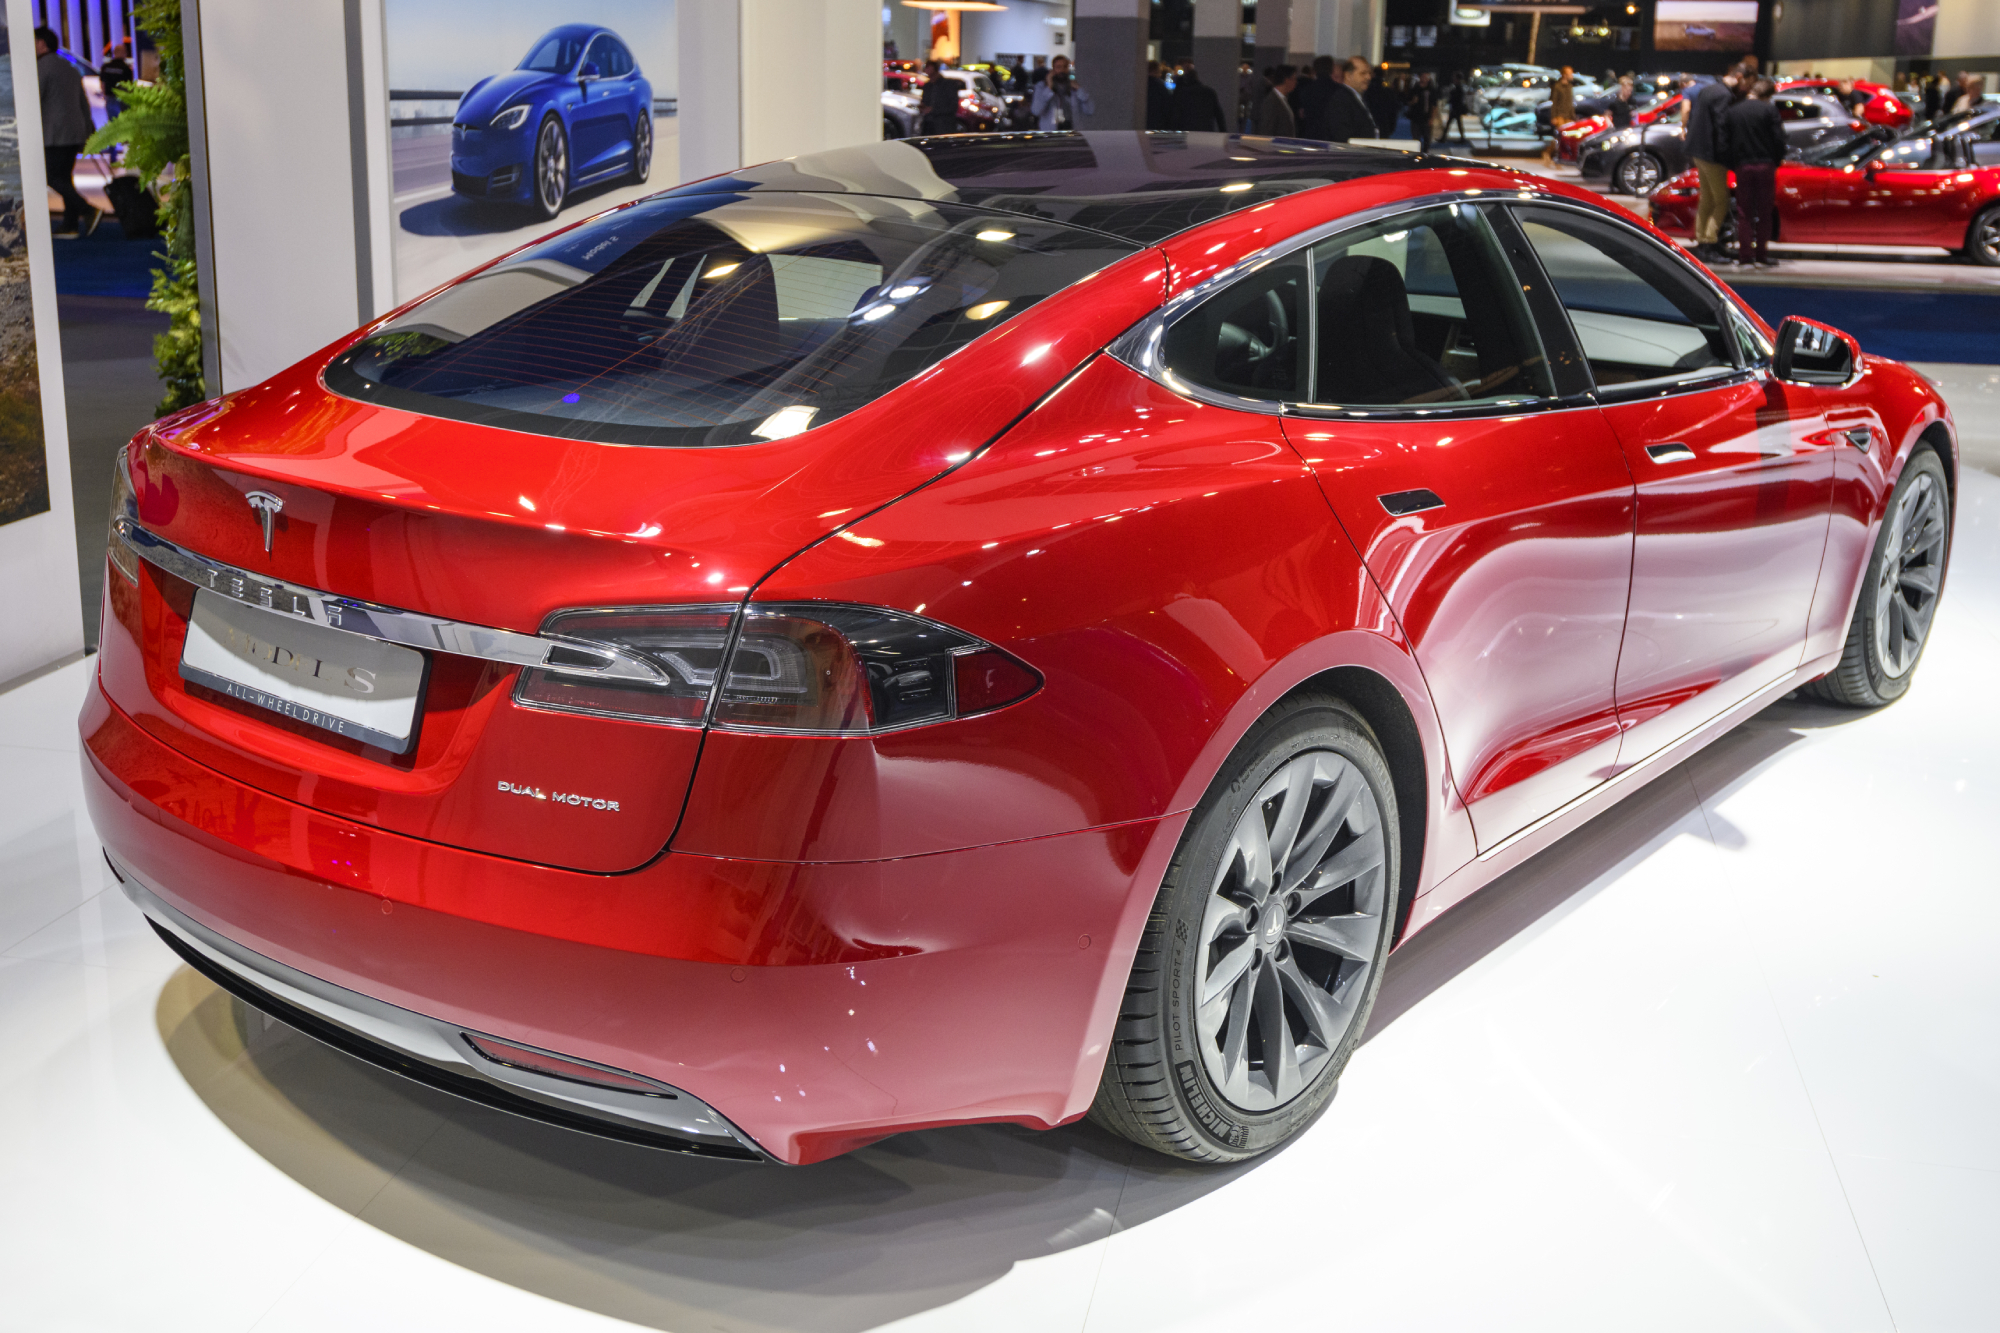 Consumer Reports Says to Avoid the 2020 Tesla Model S